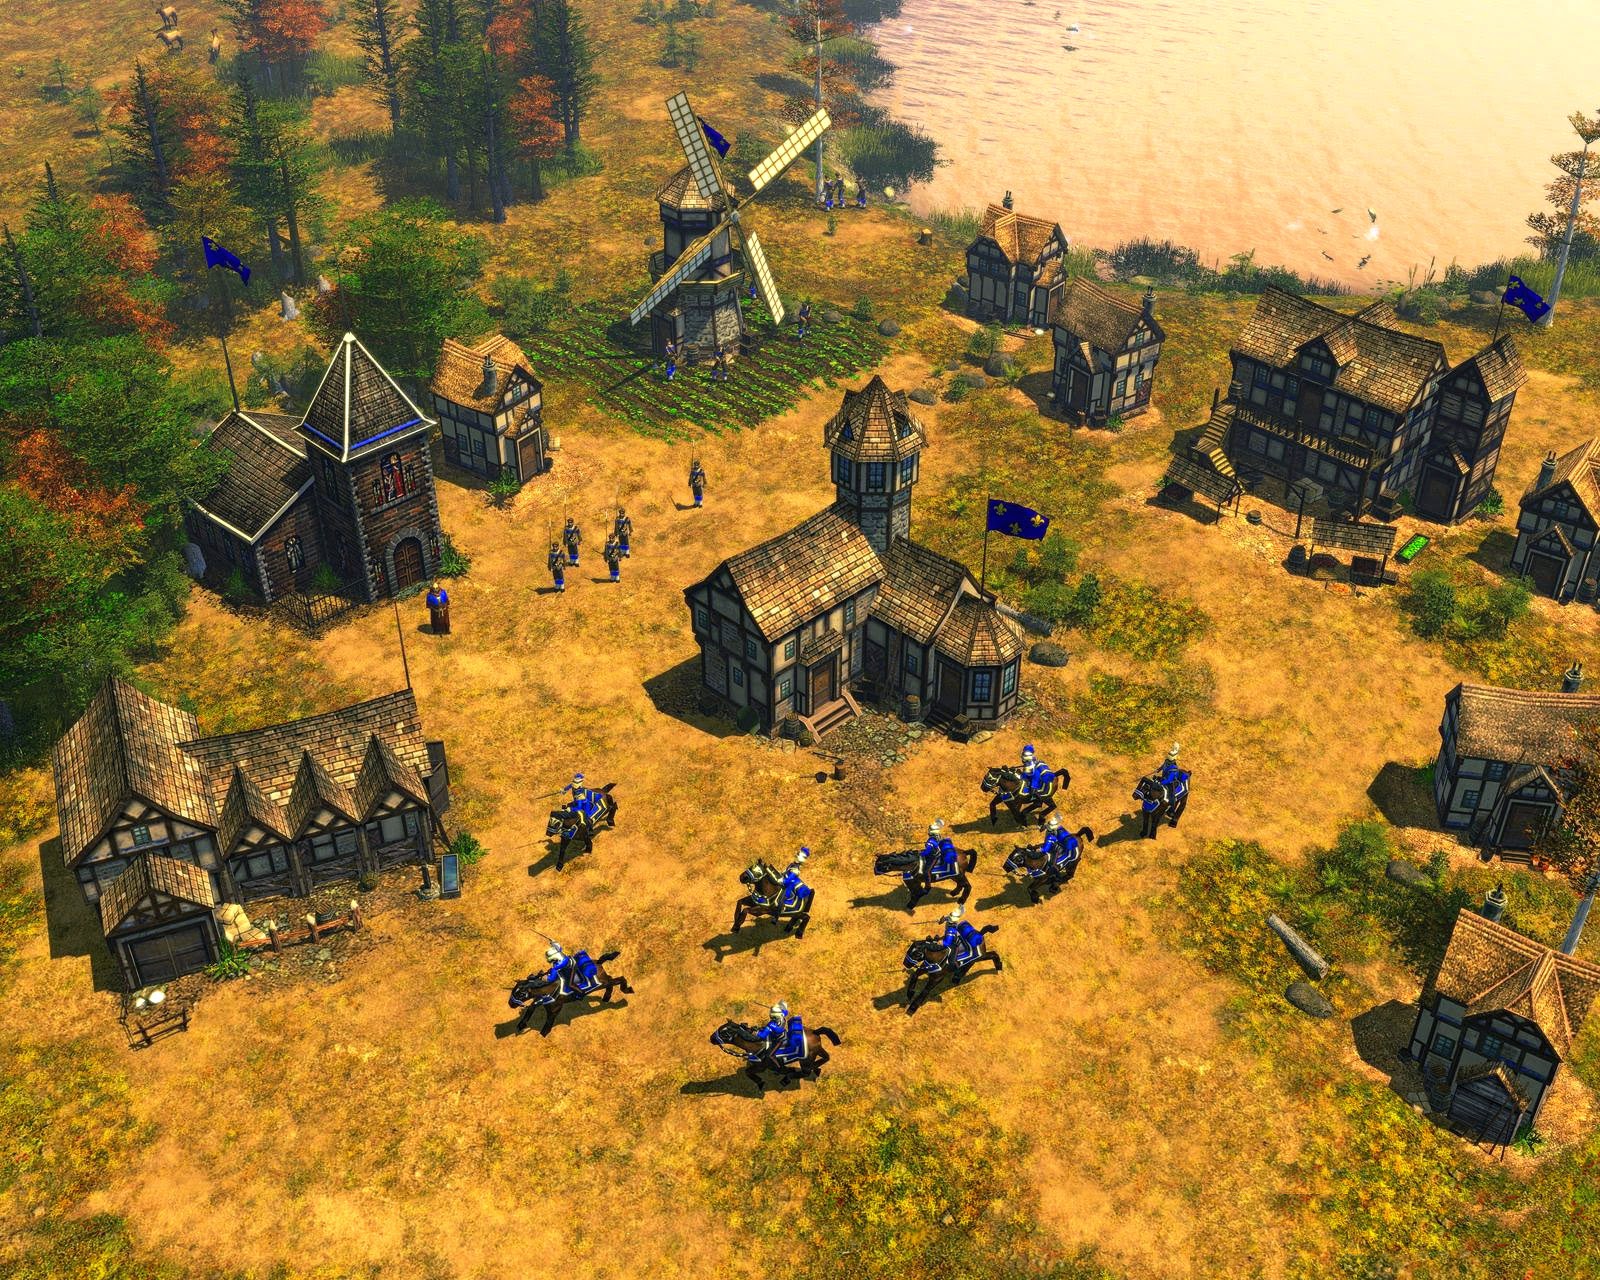 age of empires 3 mac download full version free